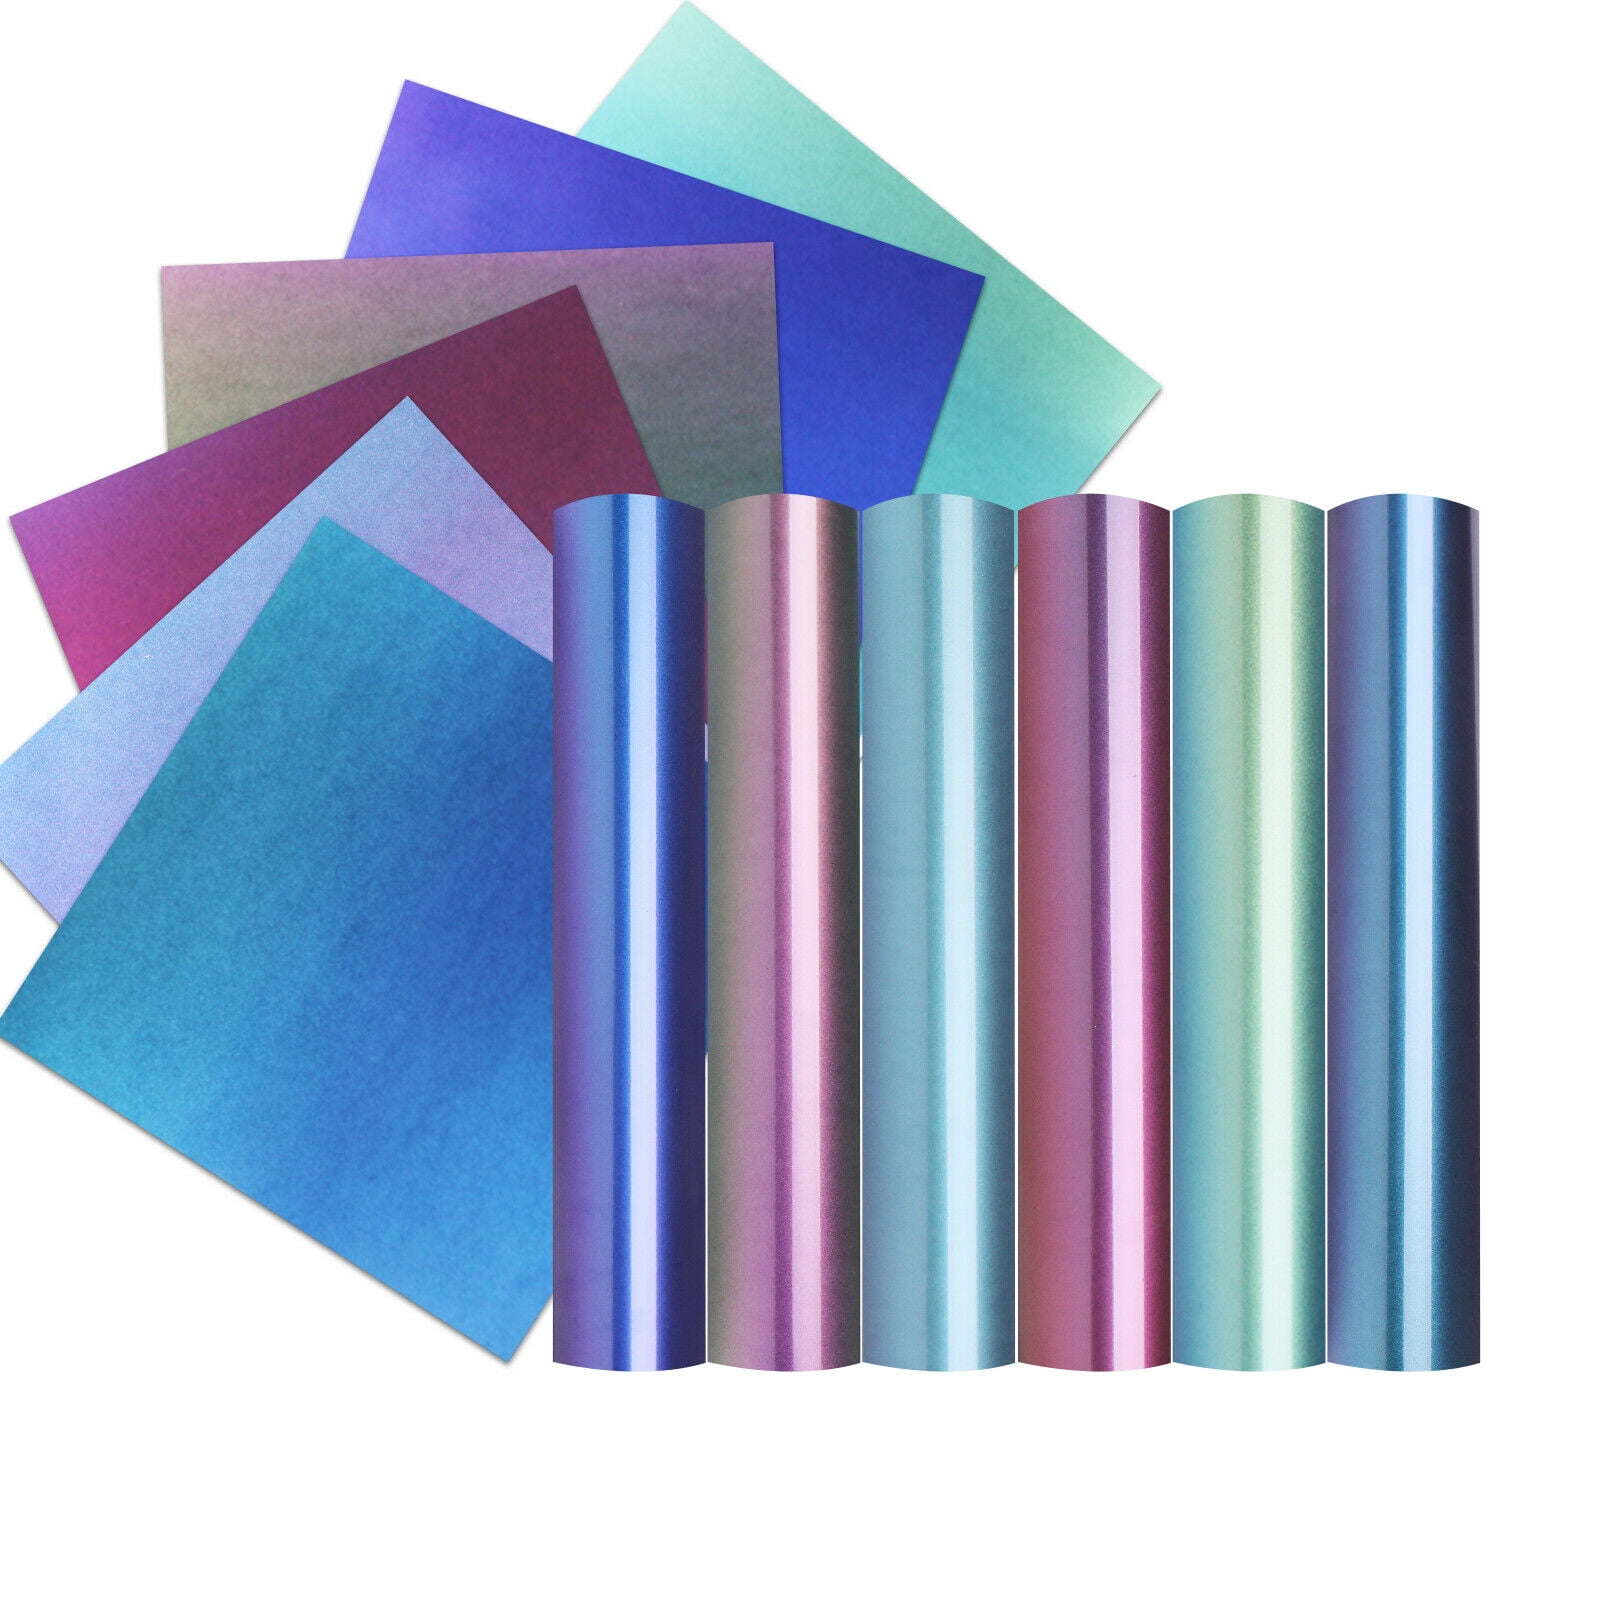 Printed HTV Ombré Blue and Bright Mint 12 x 15 Sheet